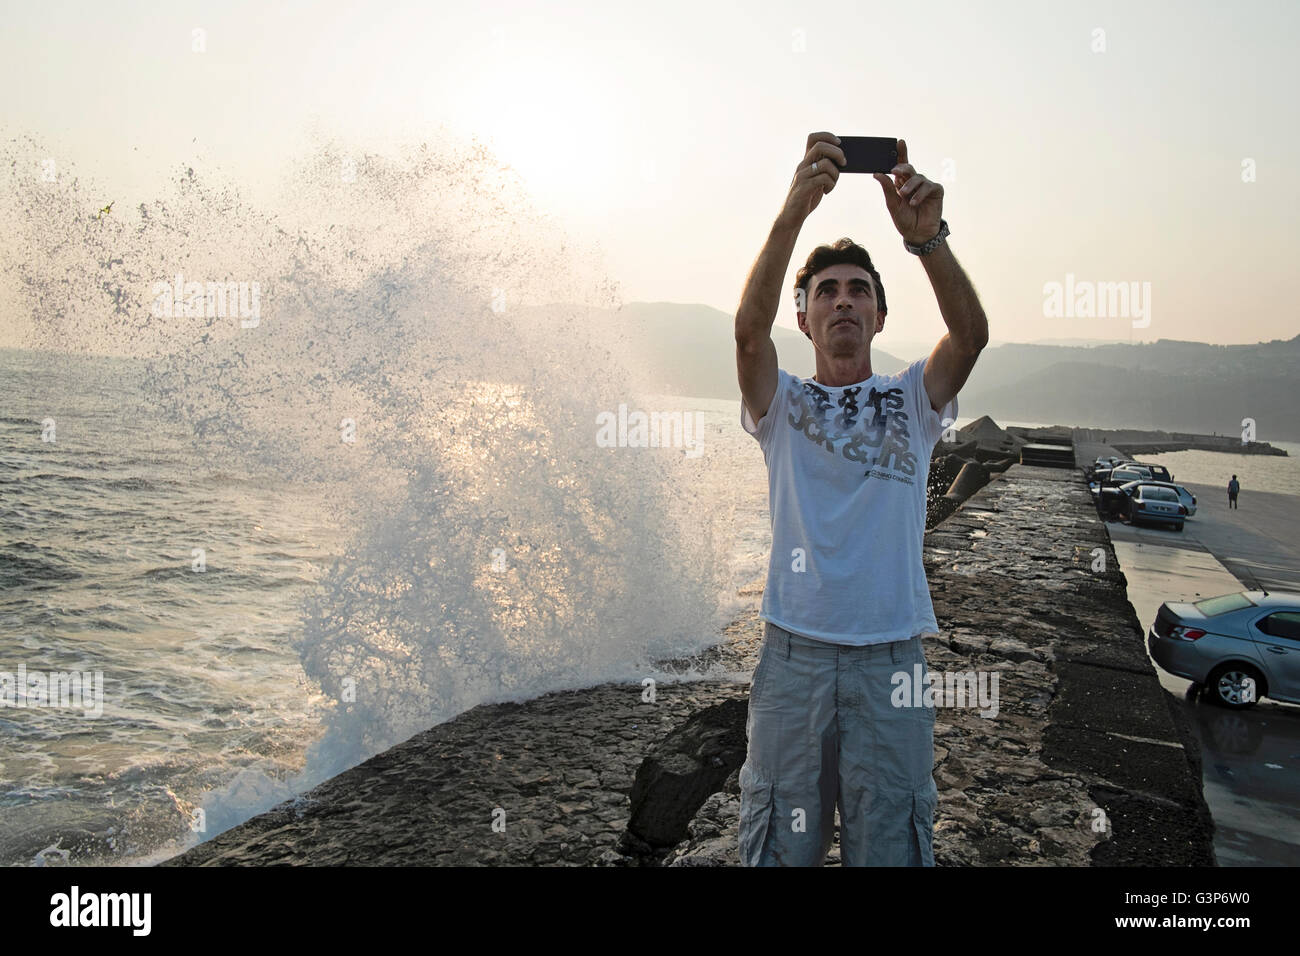 A middle aged man captures a selfie of himself in front of a wave crashing onto rocks in Amasra, Bartin, Turkey Stock Photo